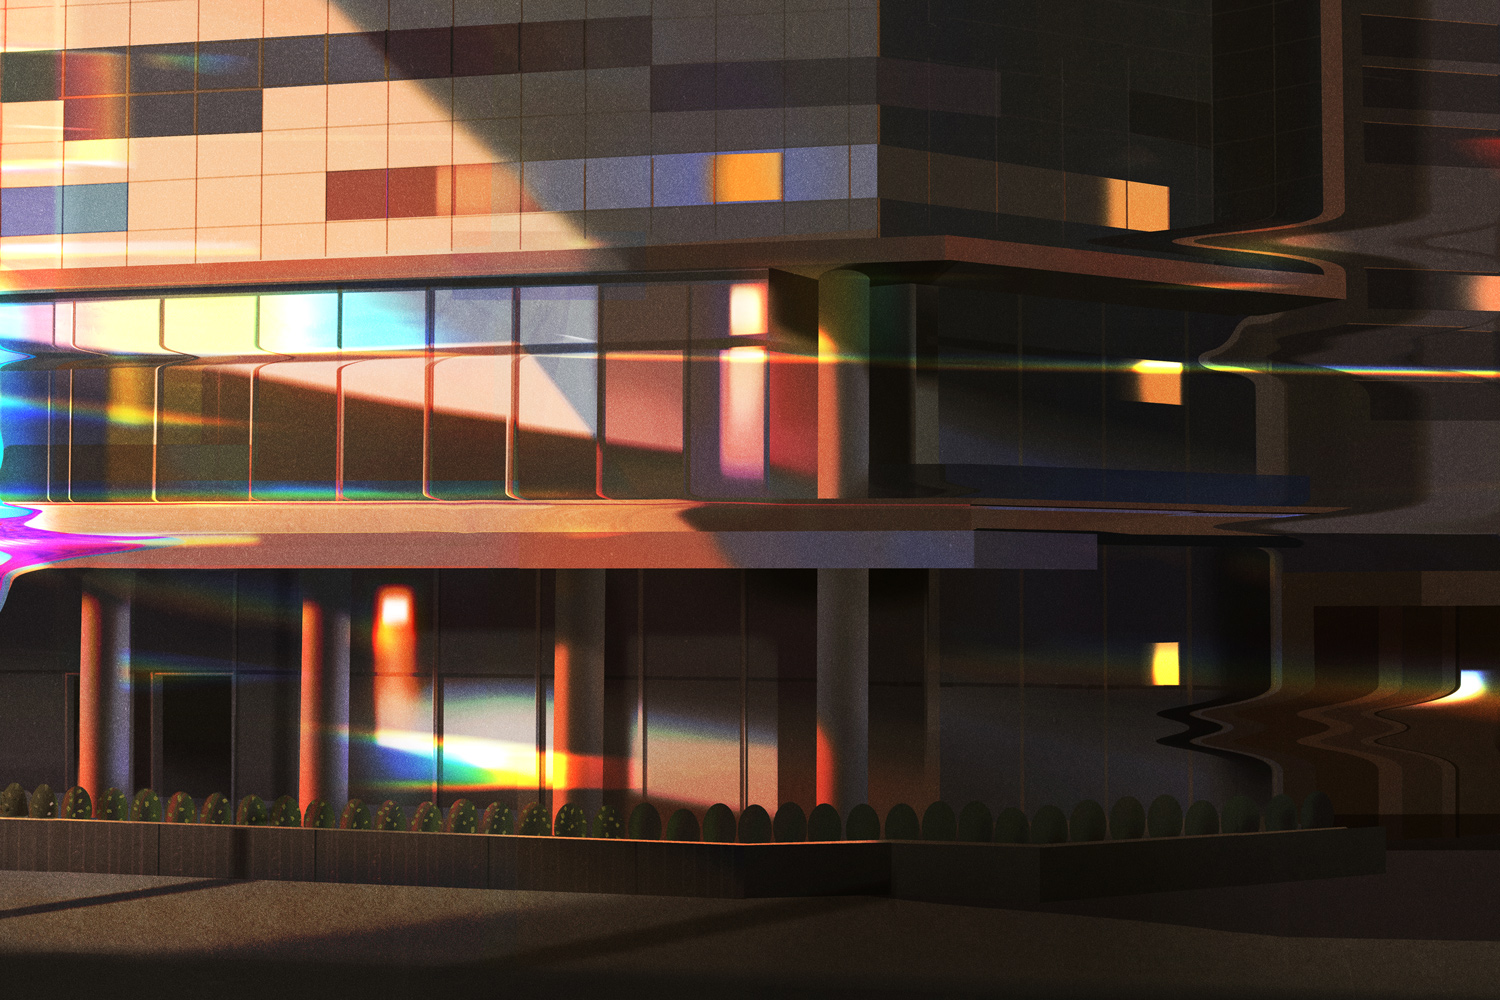 An illustration of the TIFF Lightbox during golden hour with rainbow reflections and distortions